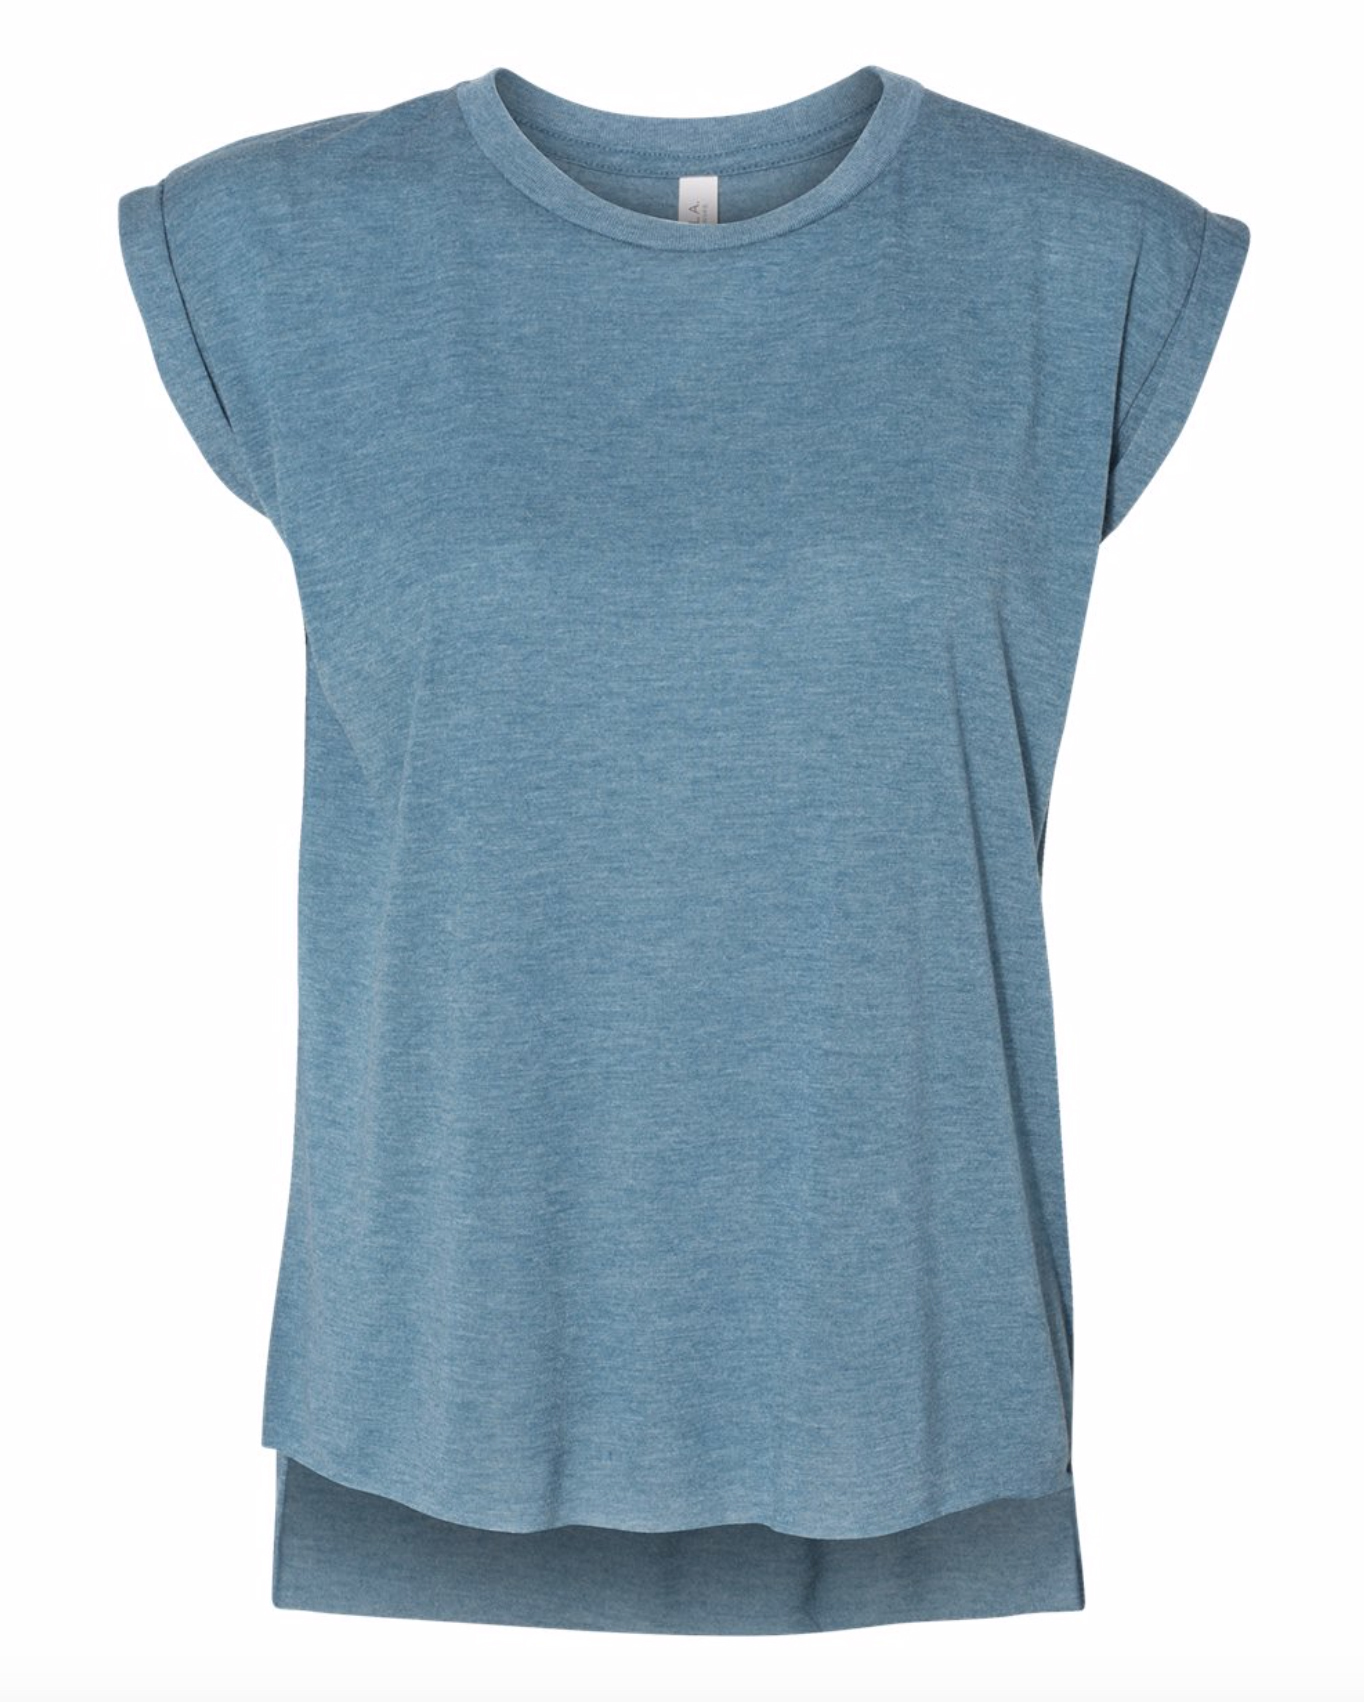 Ladies Flowy Sleeveless Tee w/rolled cuffs in TEAL